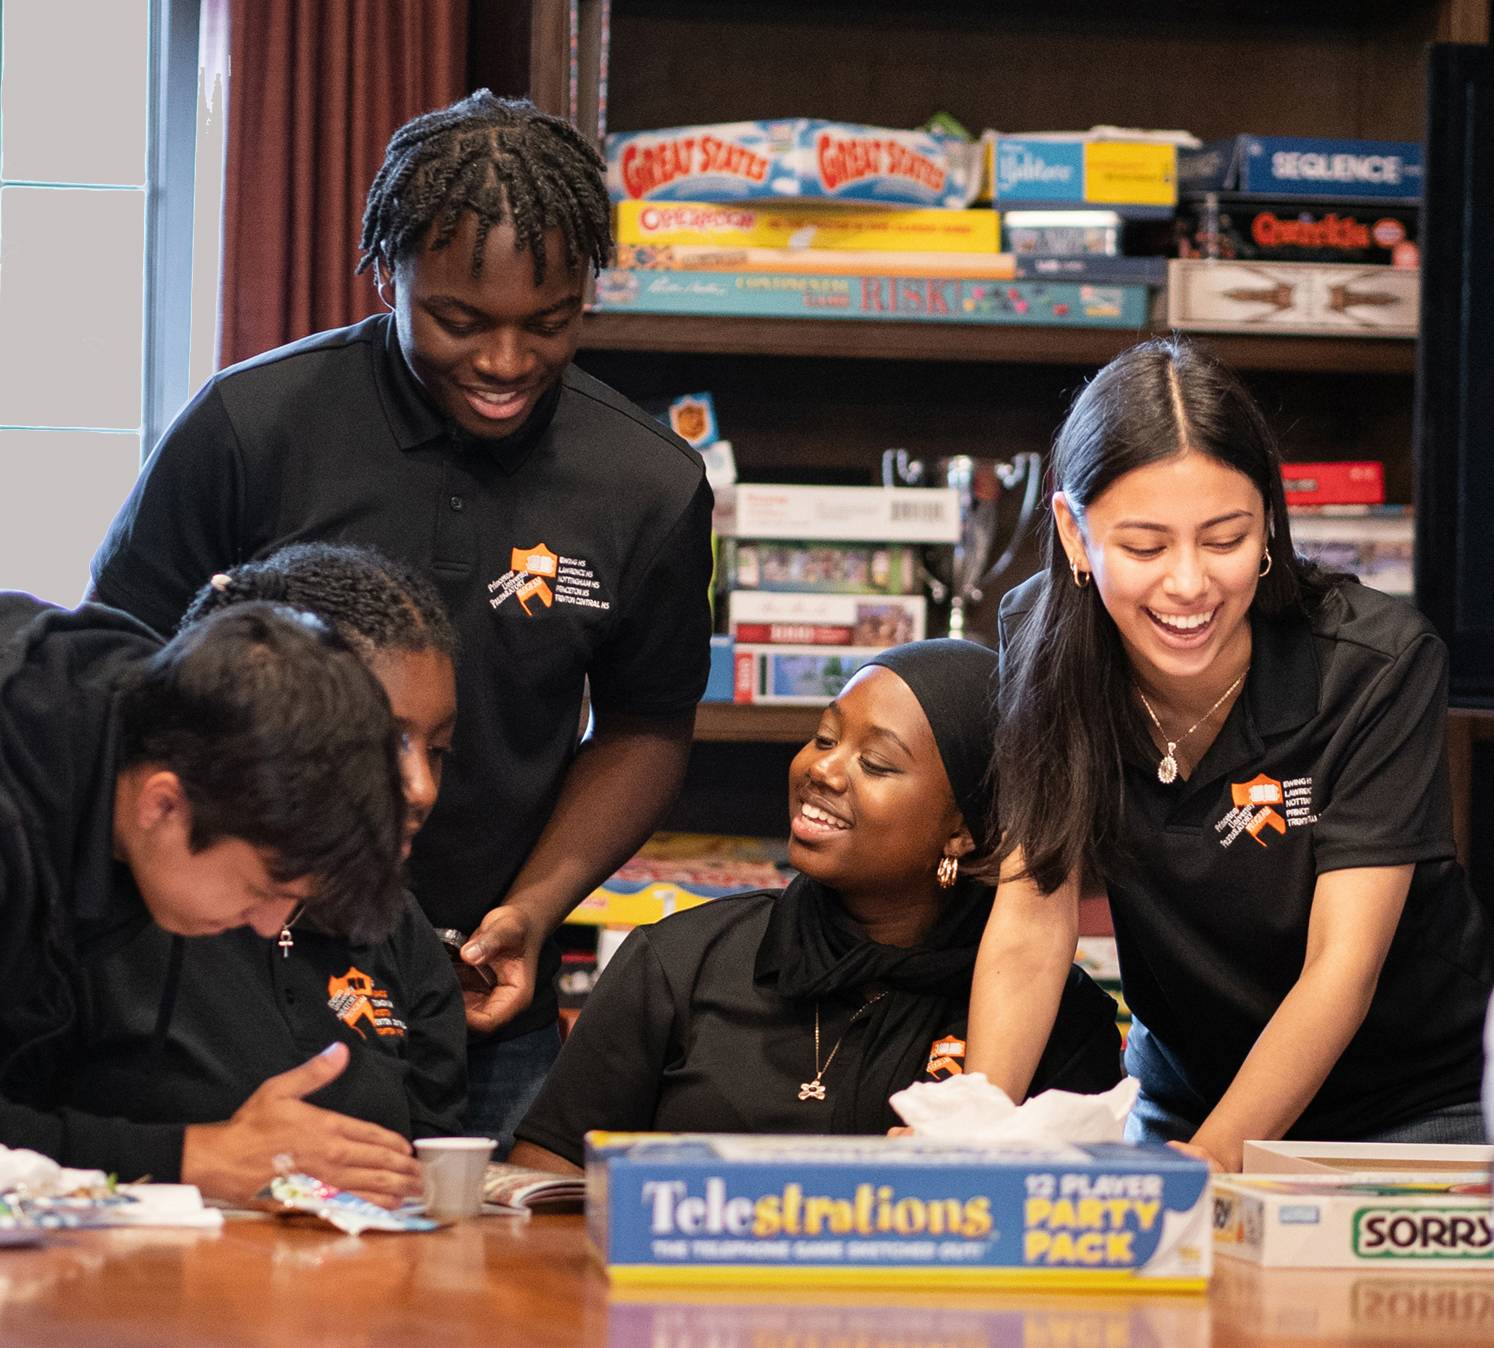 Students in the Princeton University Preparatory Program play games at lunch.